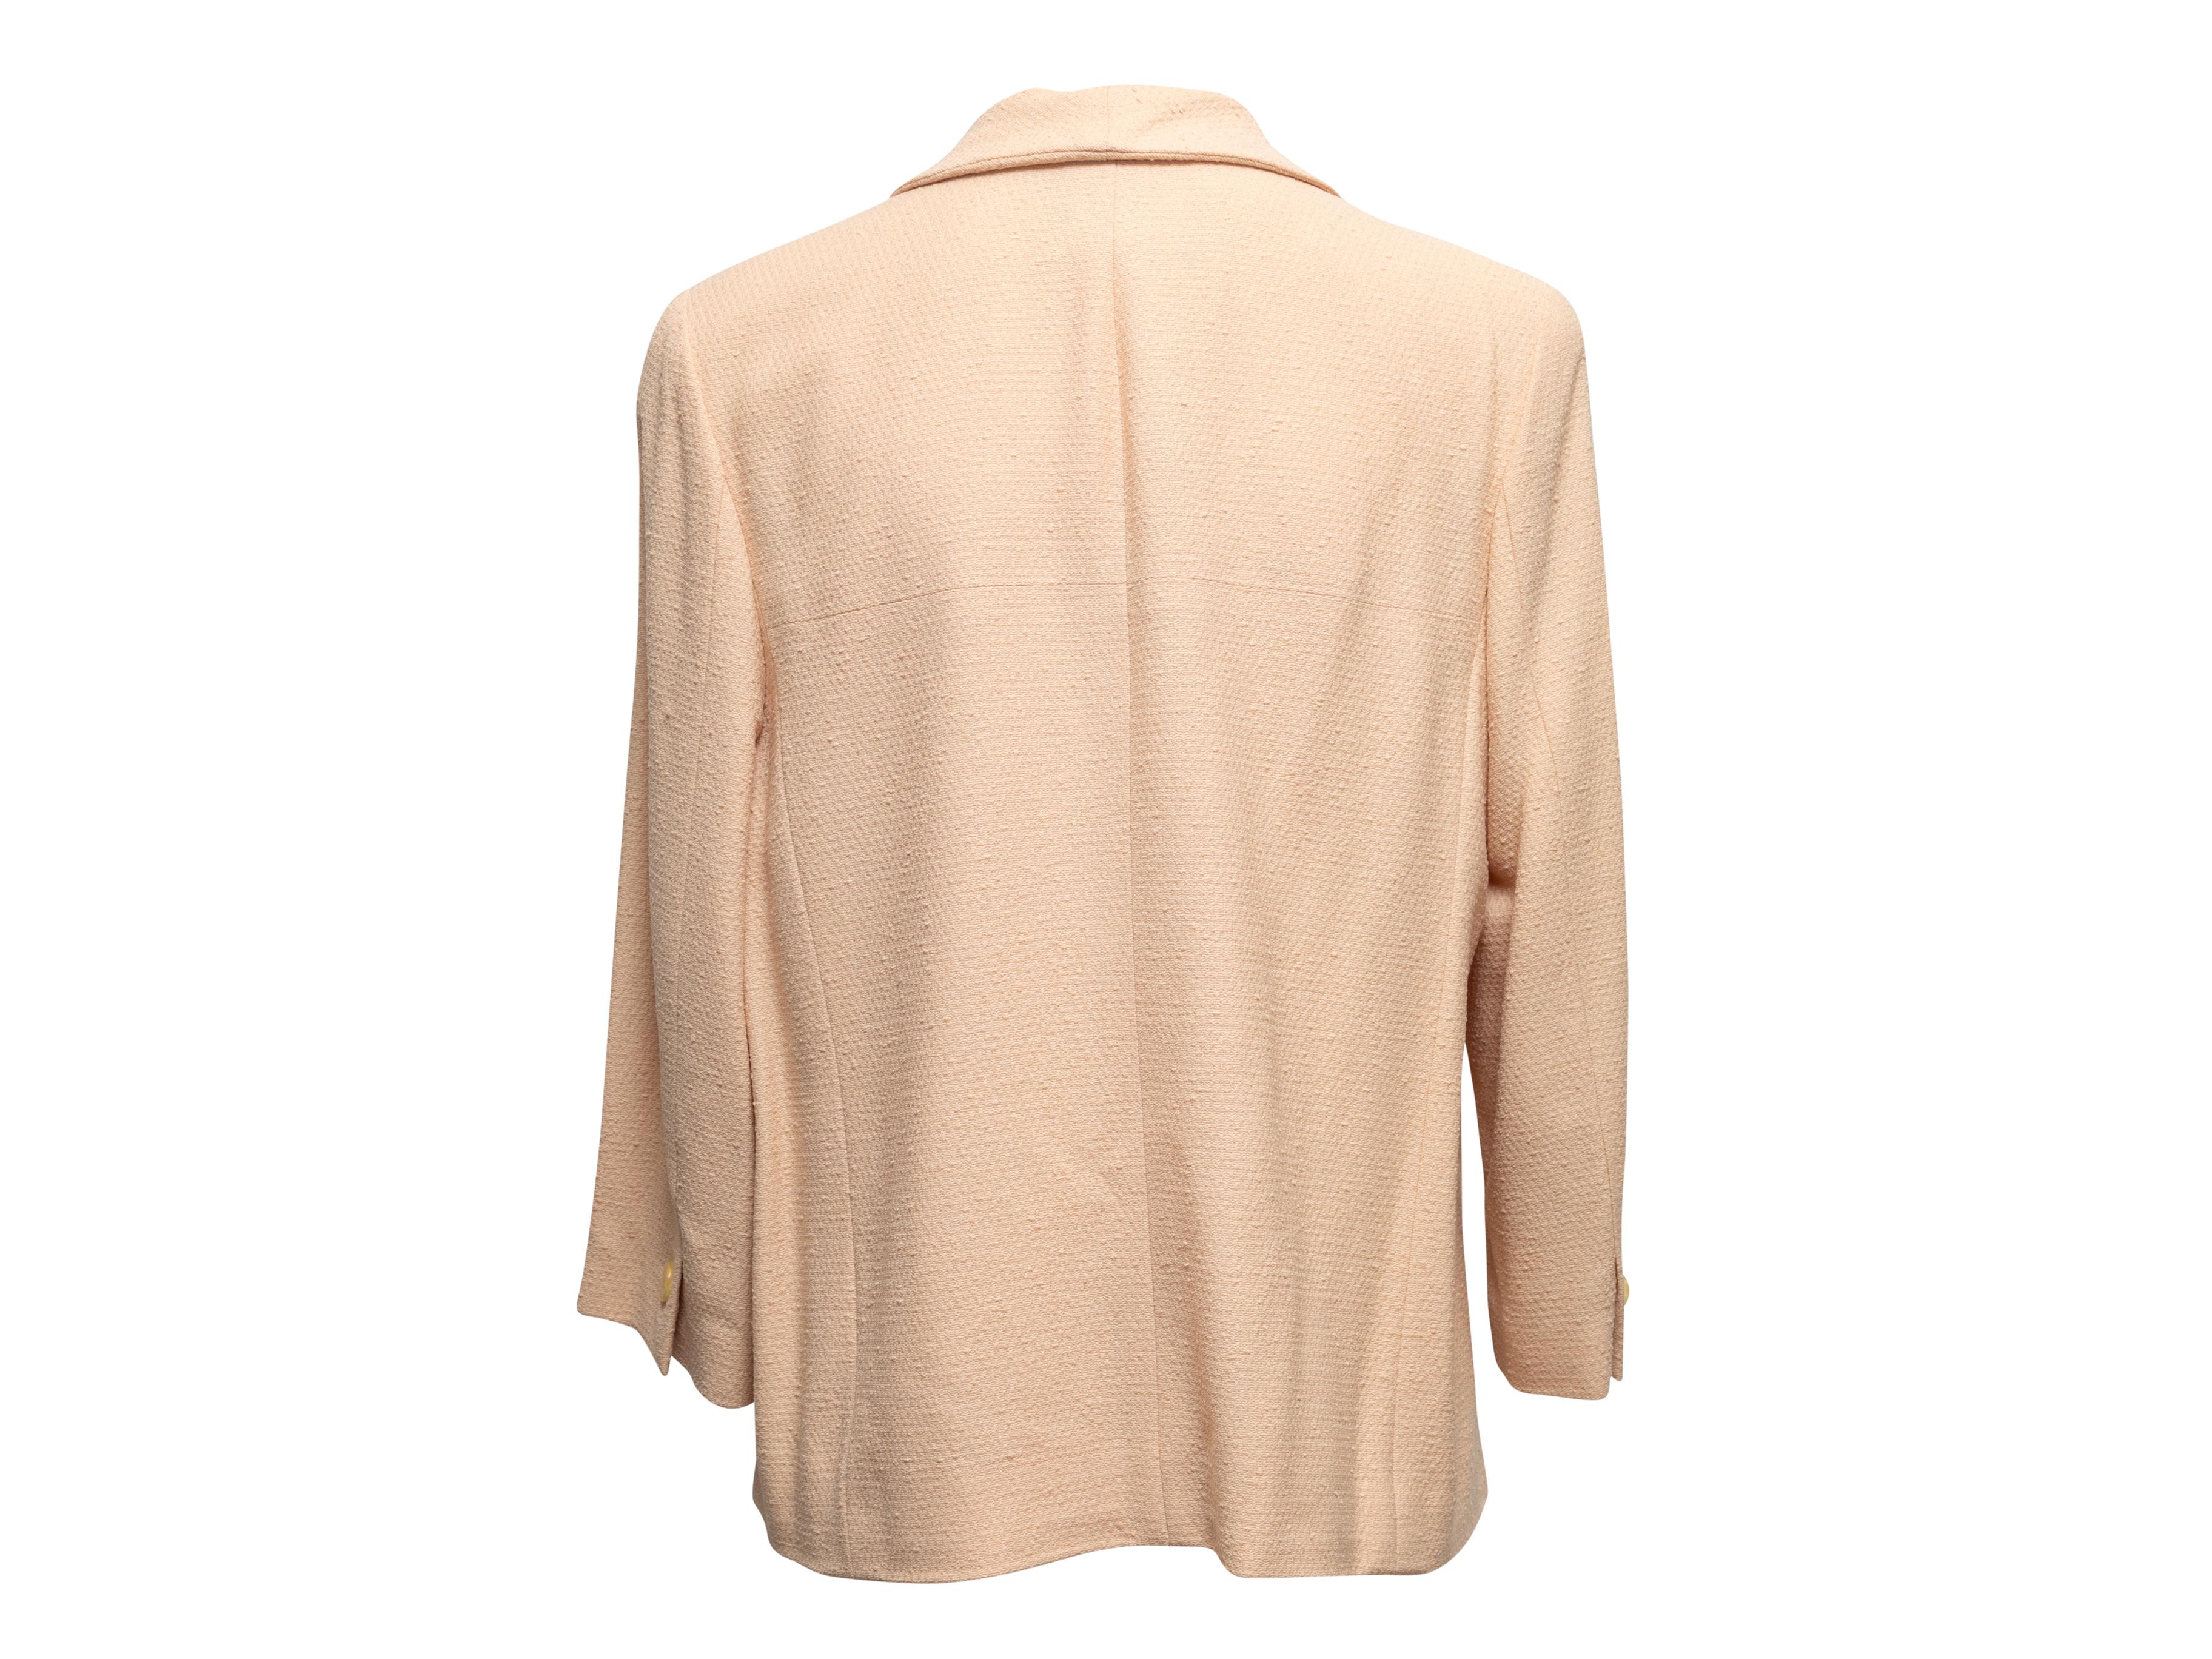 Vintage Beige Chanel Spring/Summer 2001 Linen Blazer Size FR 34 In Good Condition For Sale In New York, NY